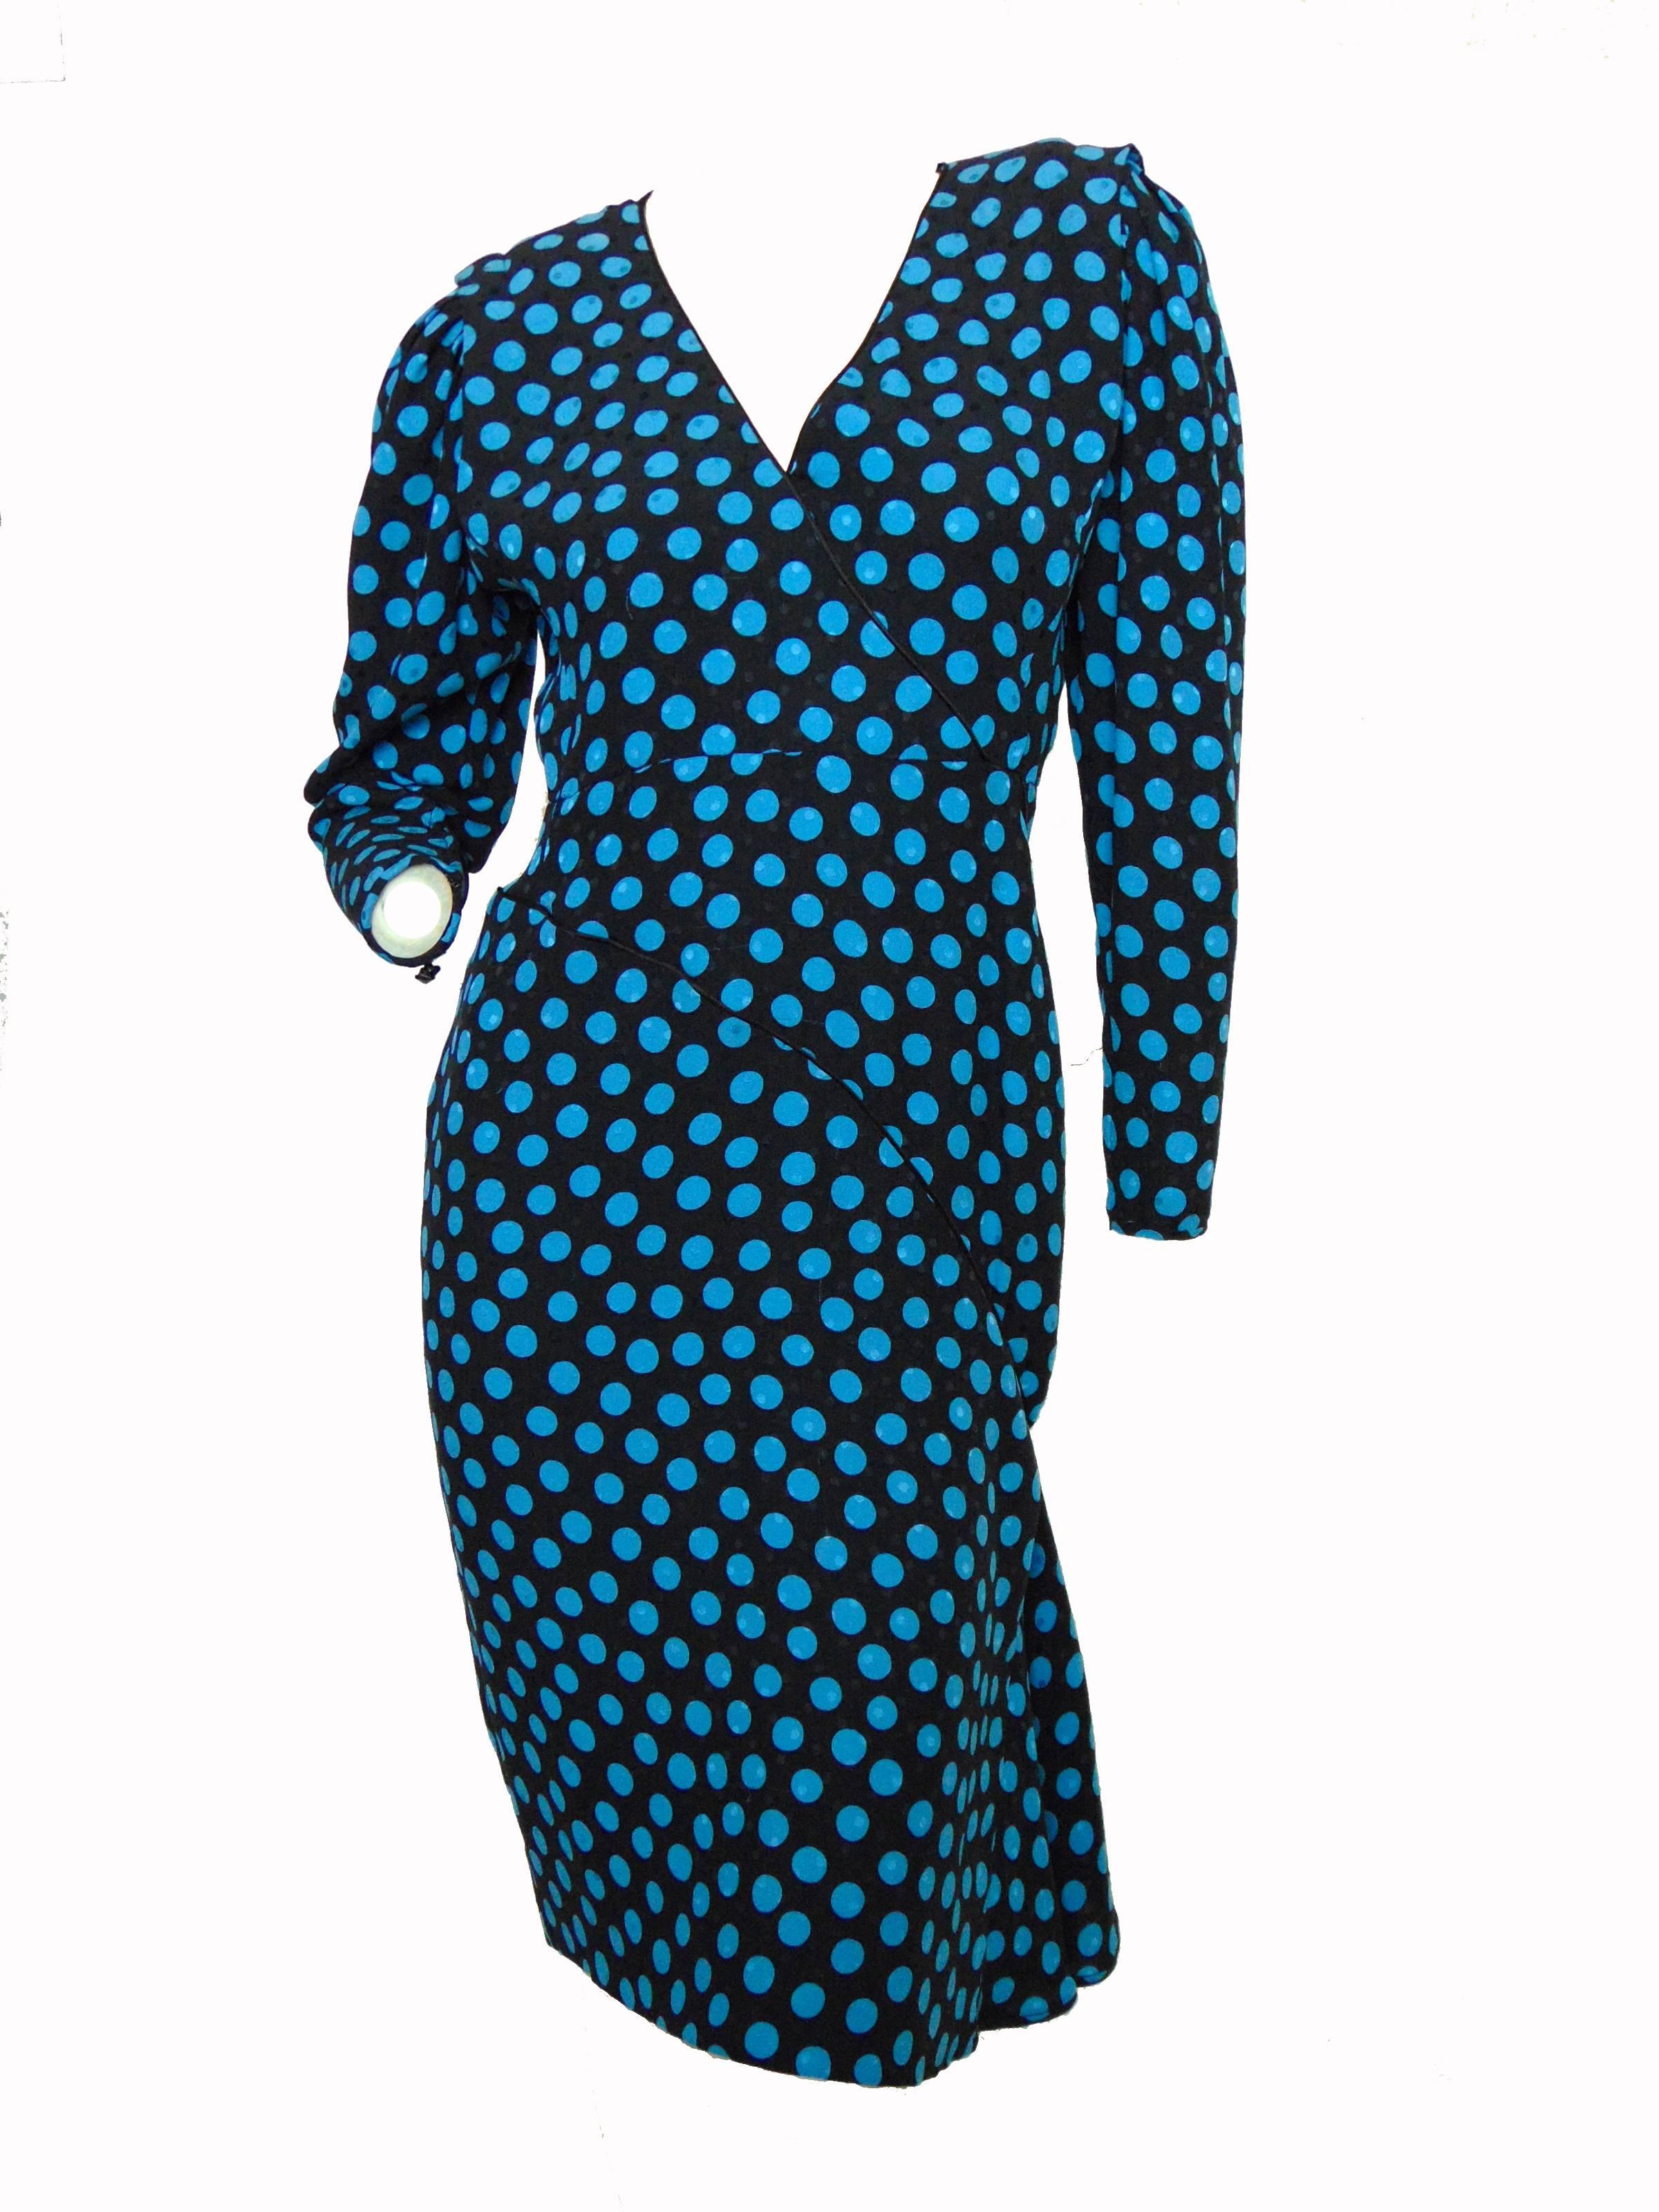 Emanuel Ungaro Parallele Silk Dress with Polka Dots 1980s Size S In Good Condition In Port Saint Lucie, FL